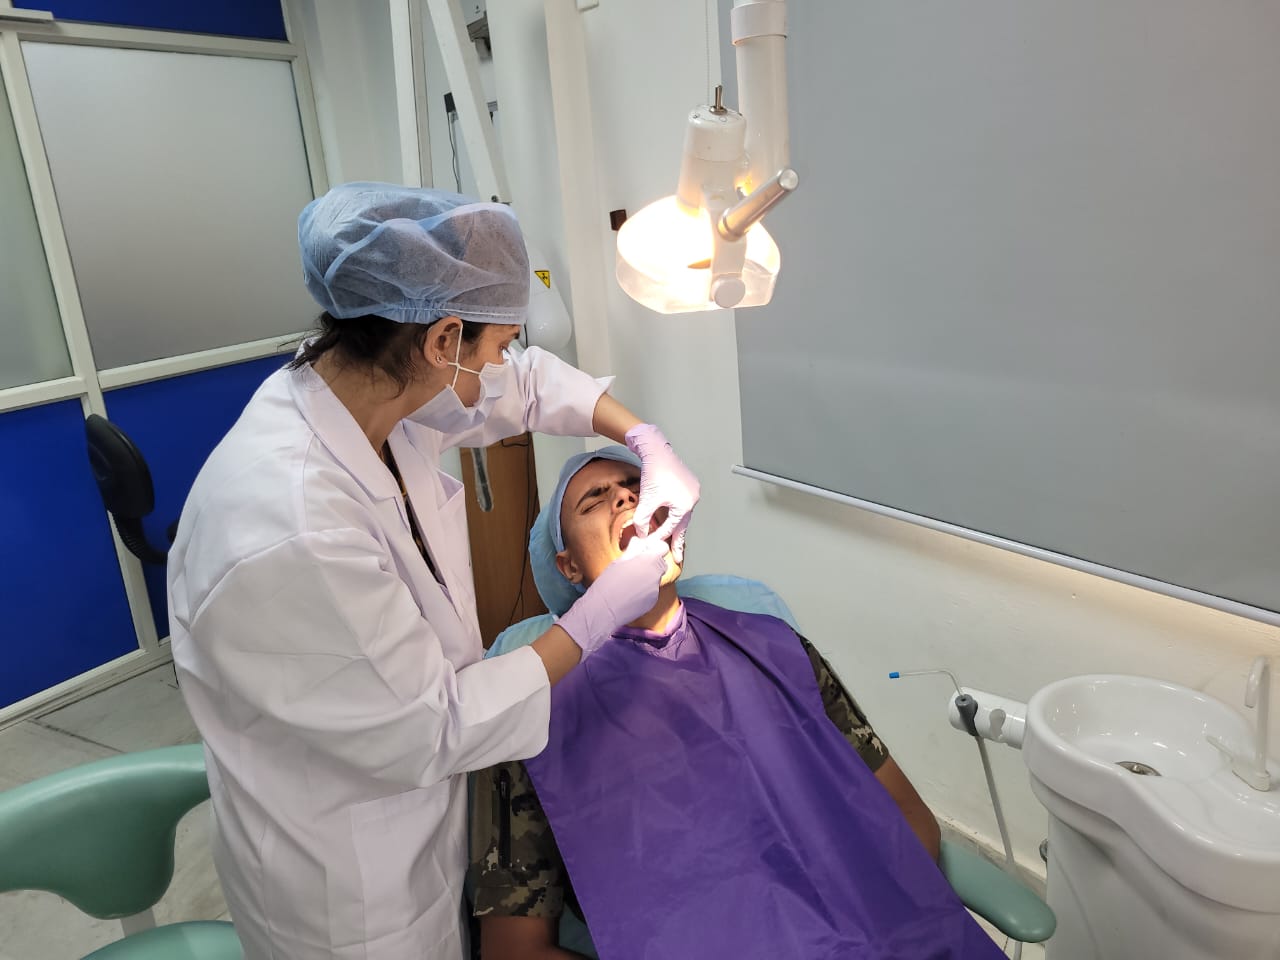 Dr. Aishwarya is doing Root Canal Treatment at her dental clinic